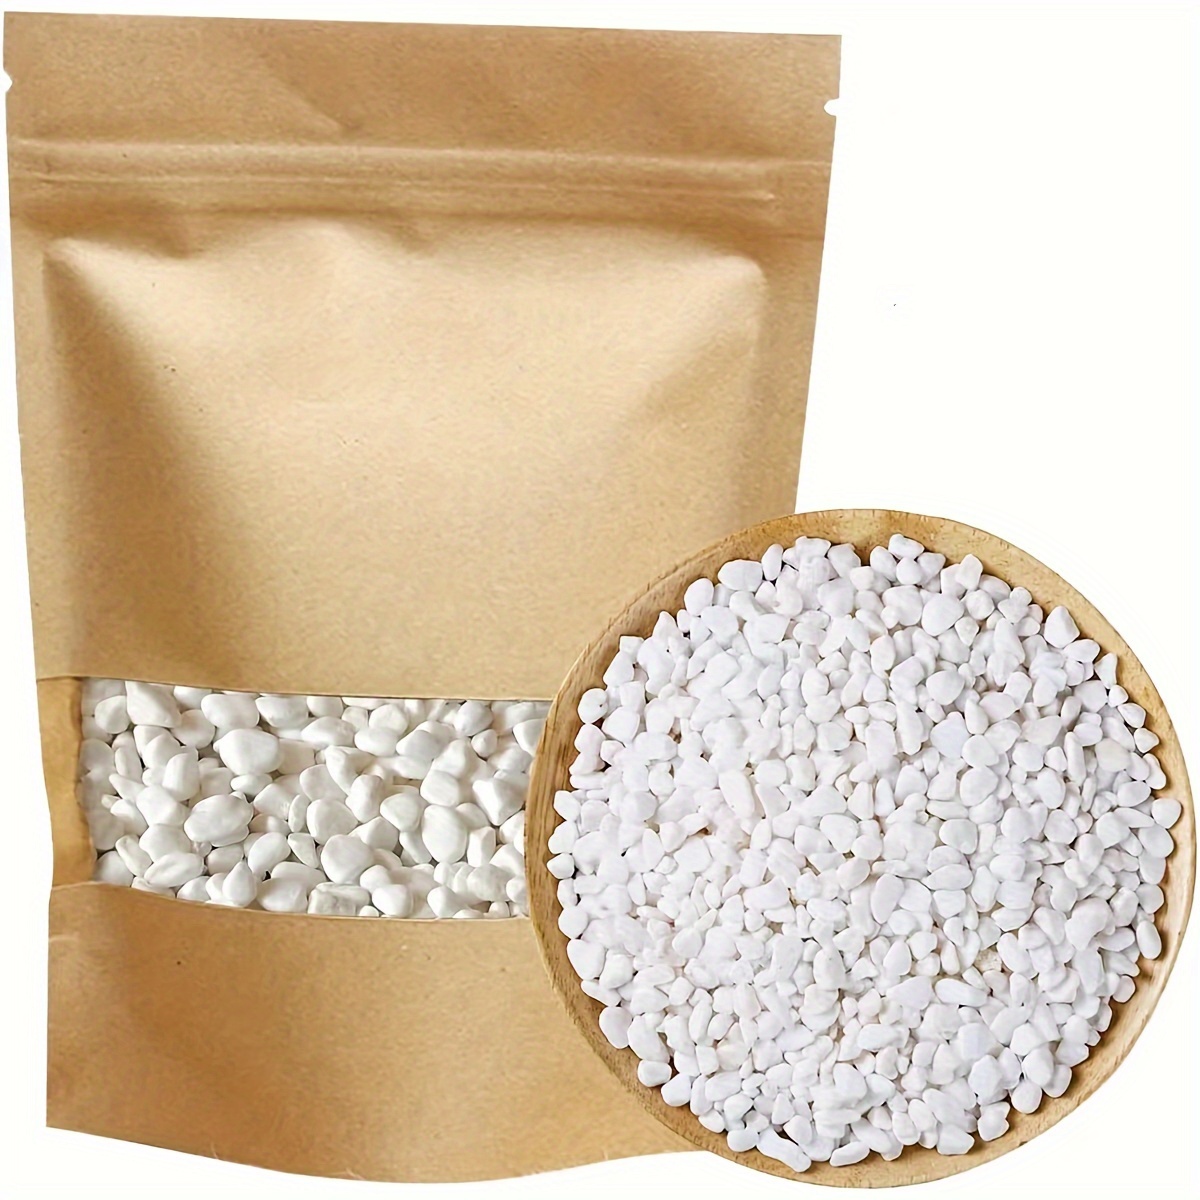 

Natural White Pebbles, 3.53/7.05/10.58oz Bags, Stone Material, Ideal For Fish Tanks, Succulent & Cacti Soil, Vase Fillers, And Garden Landscaping Decor